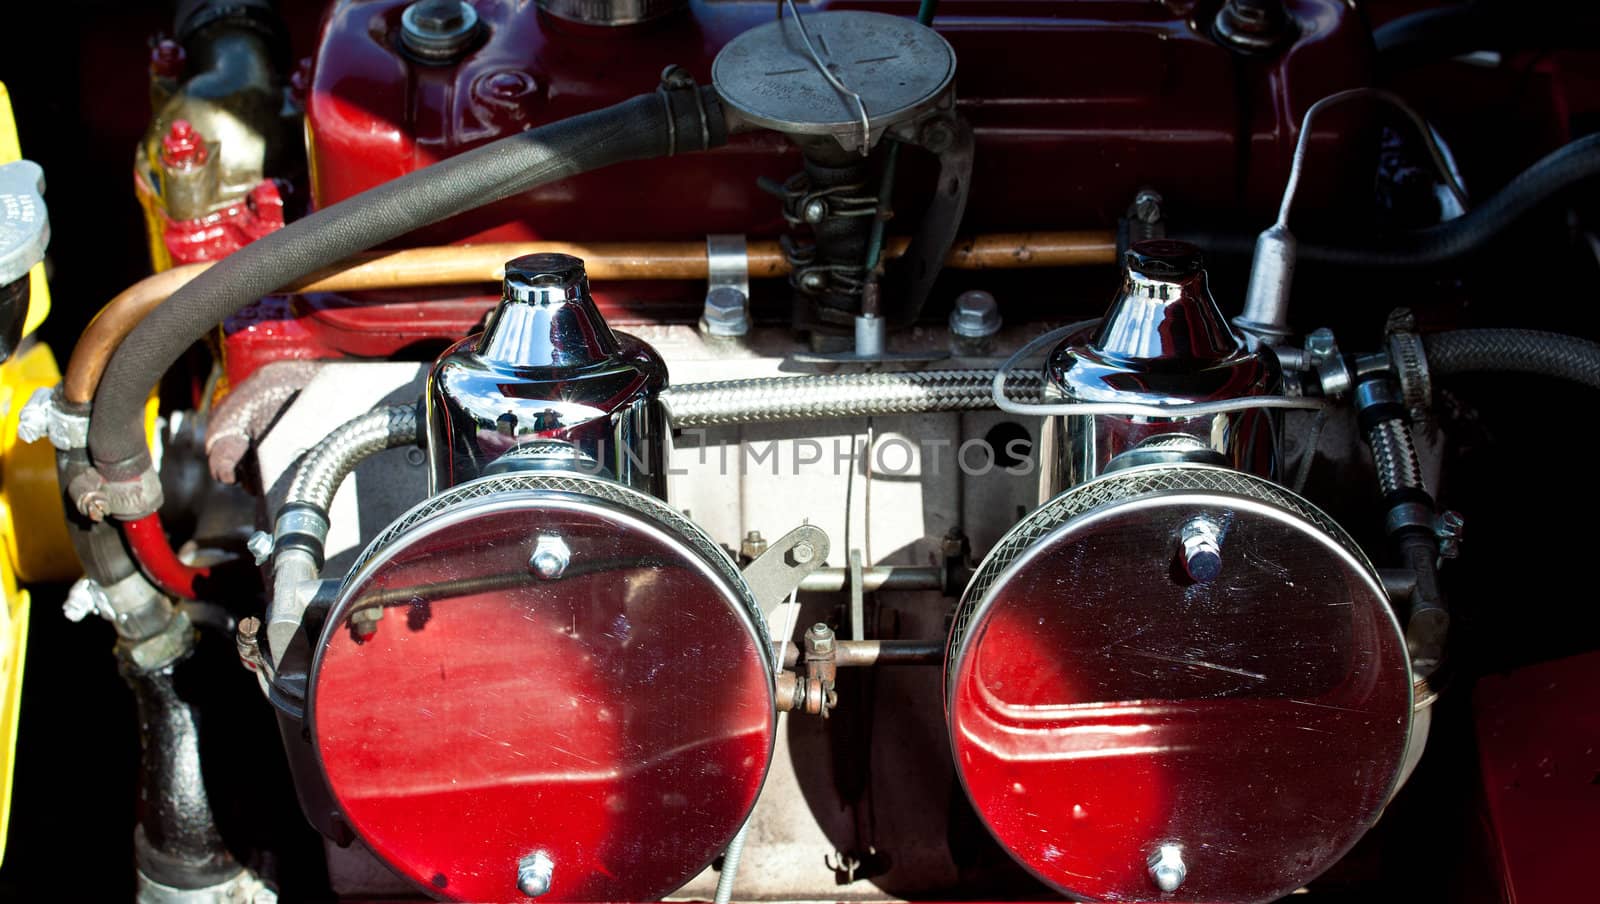 Old vintage car engine with shiny air intakes and piping